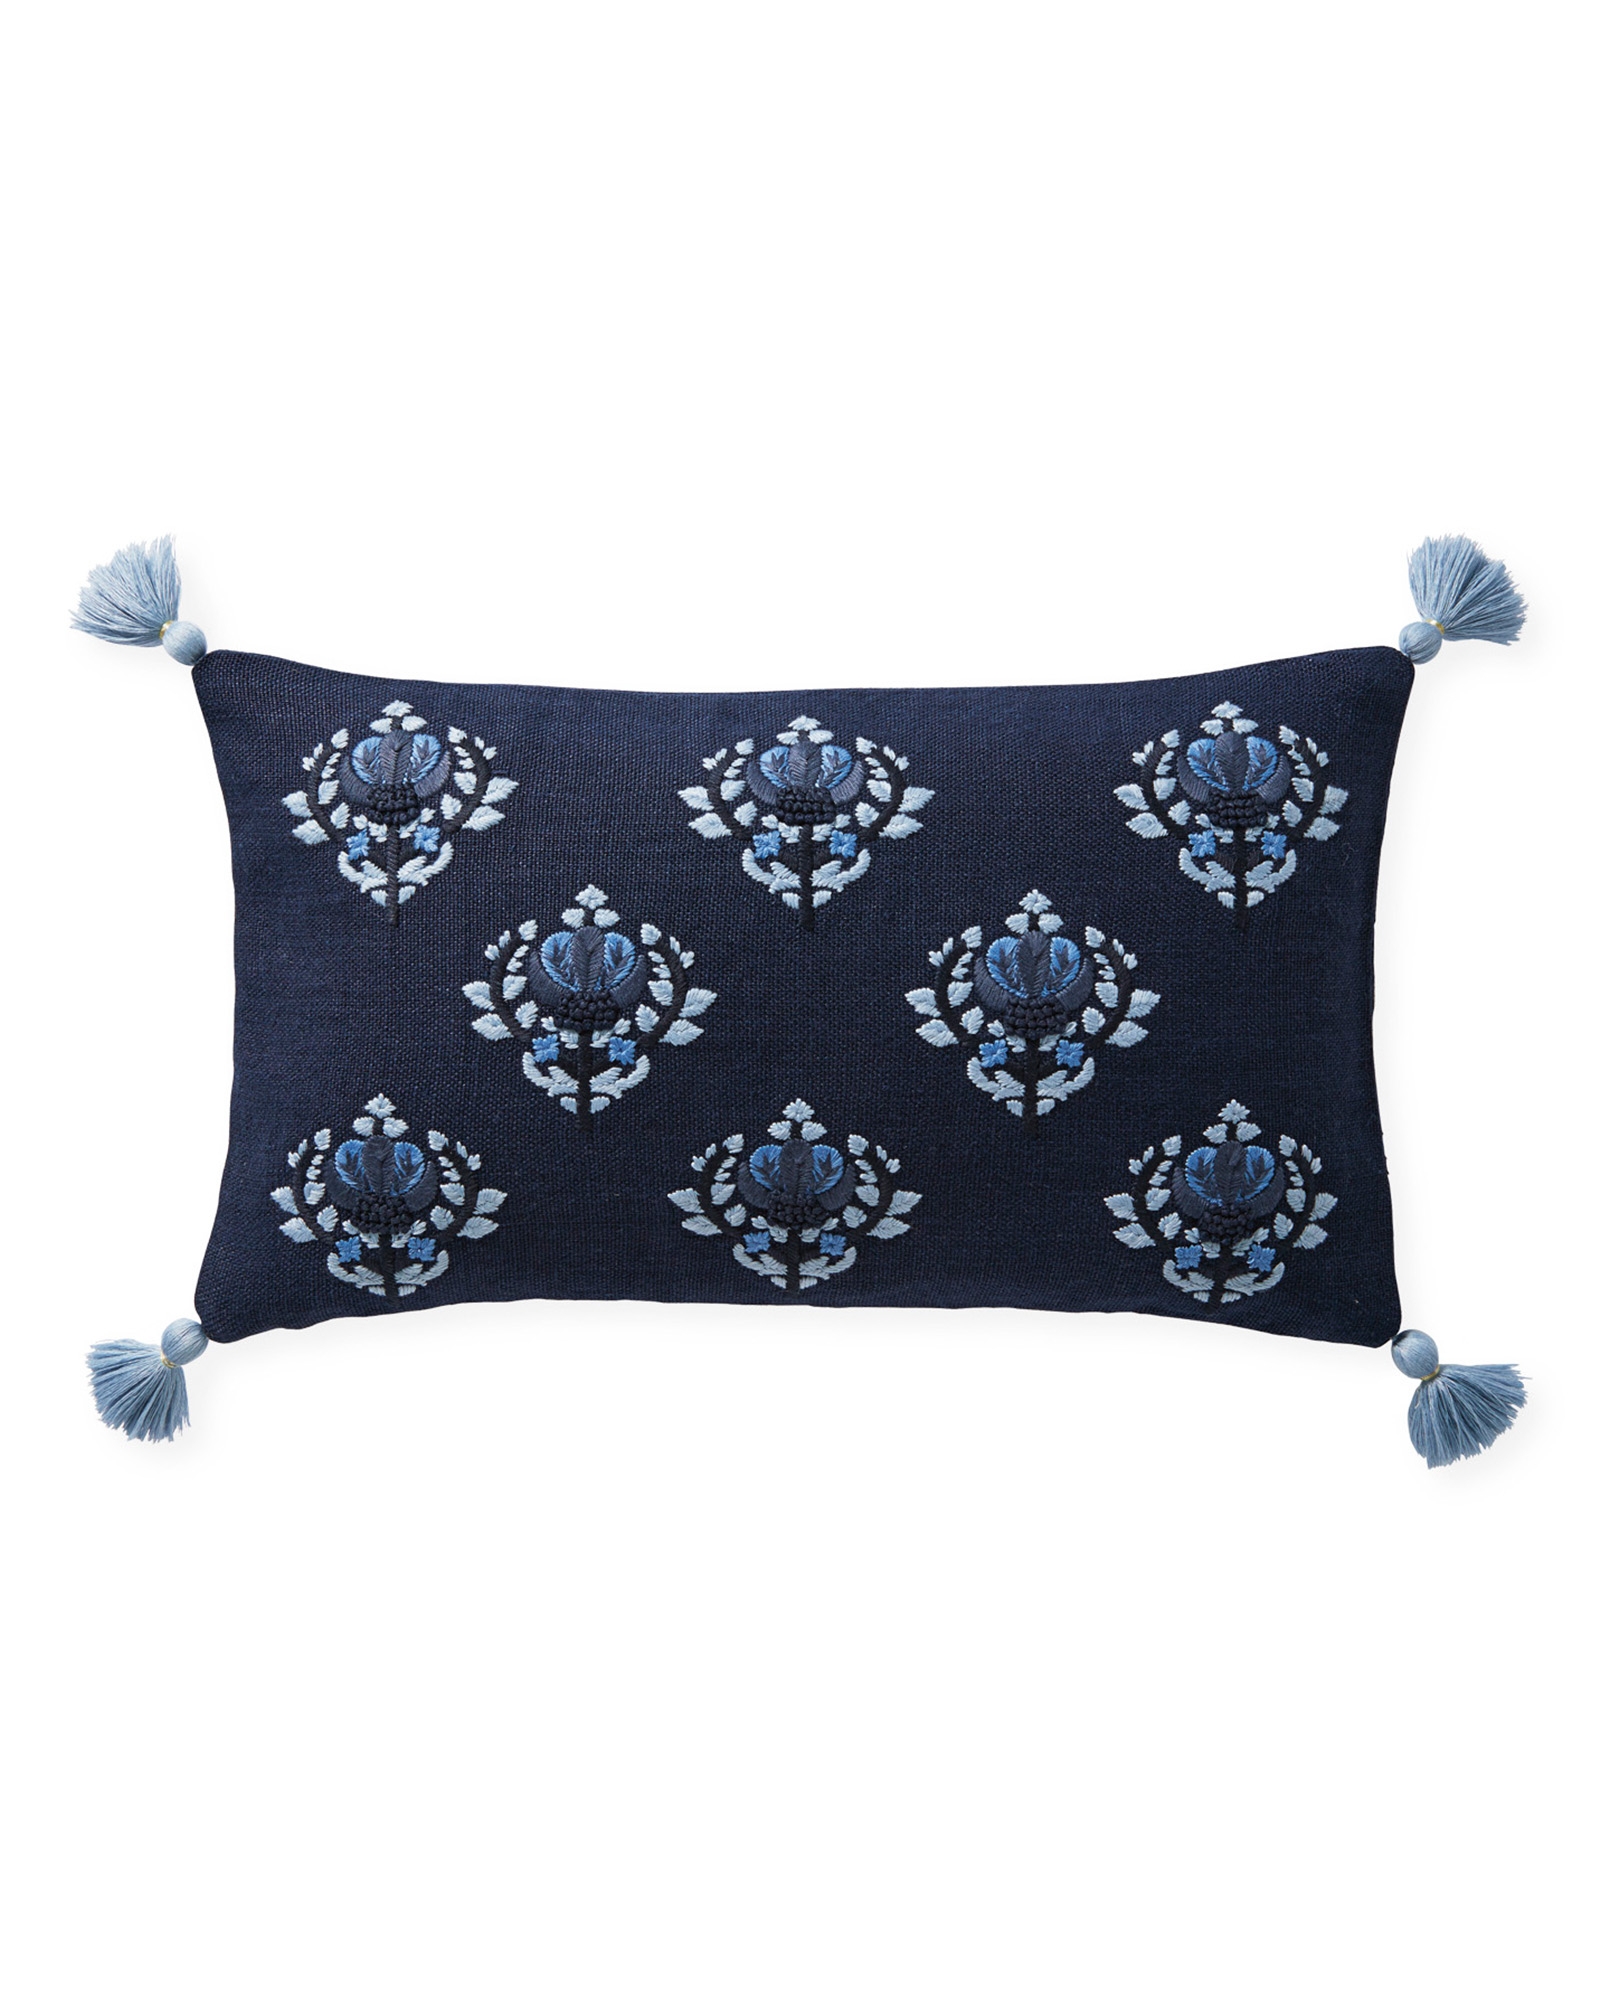 Kemp 12" x 21" Pillow Cover - Navy - Insert sold separately - Image 0